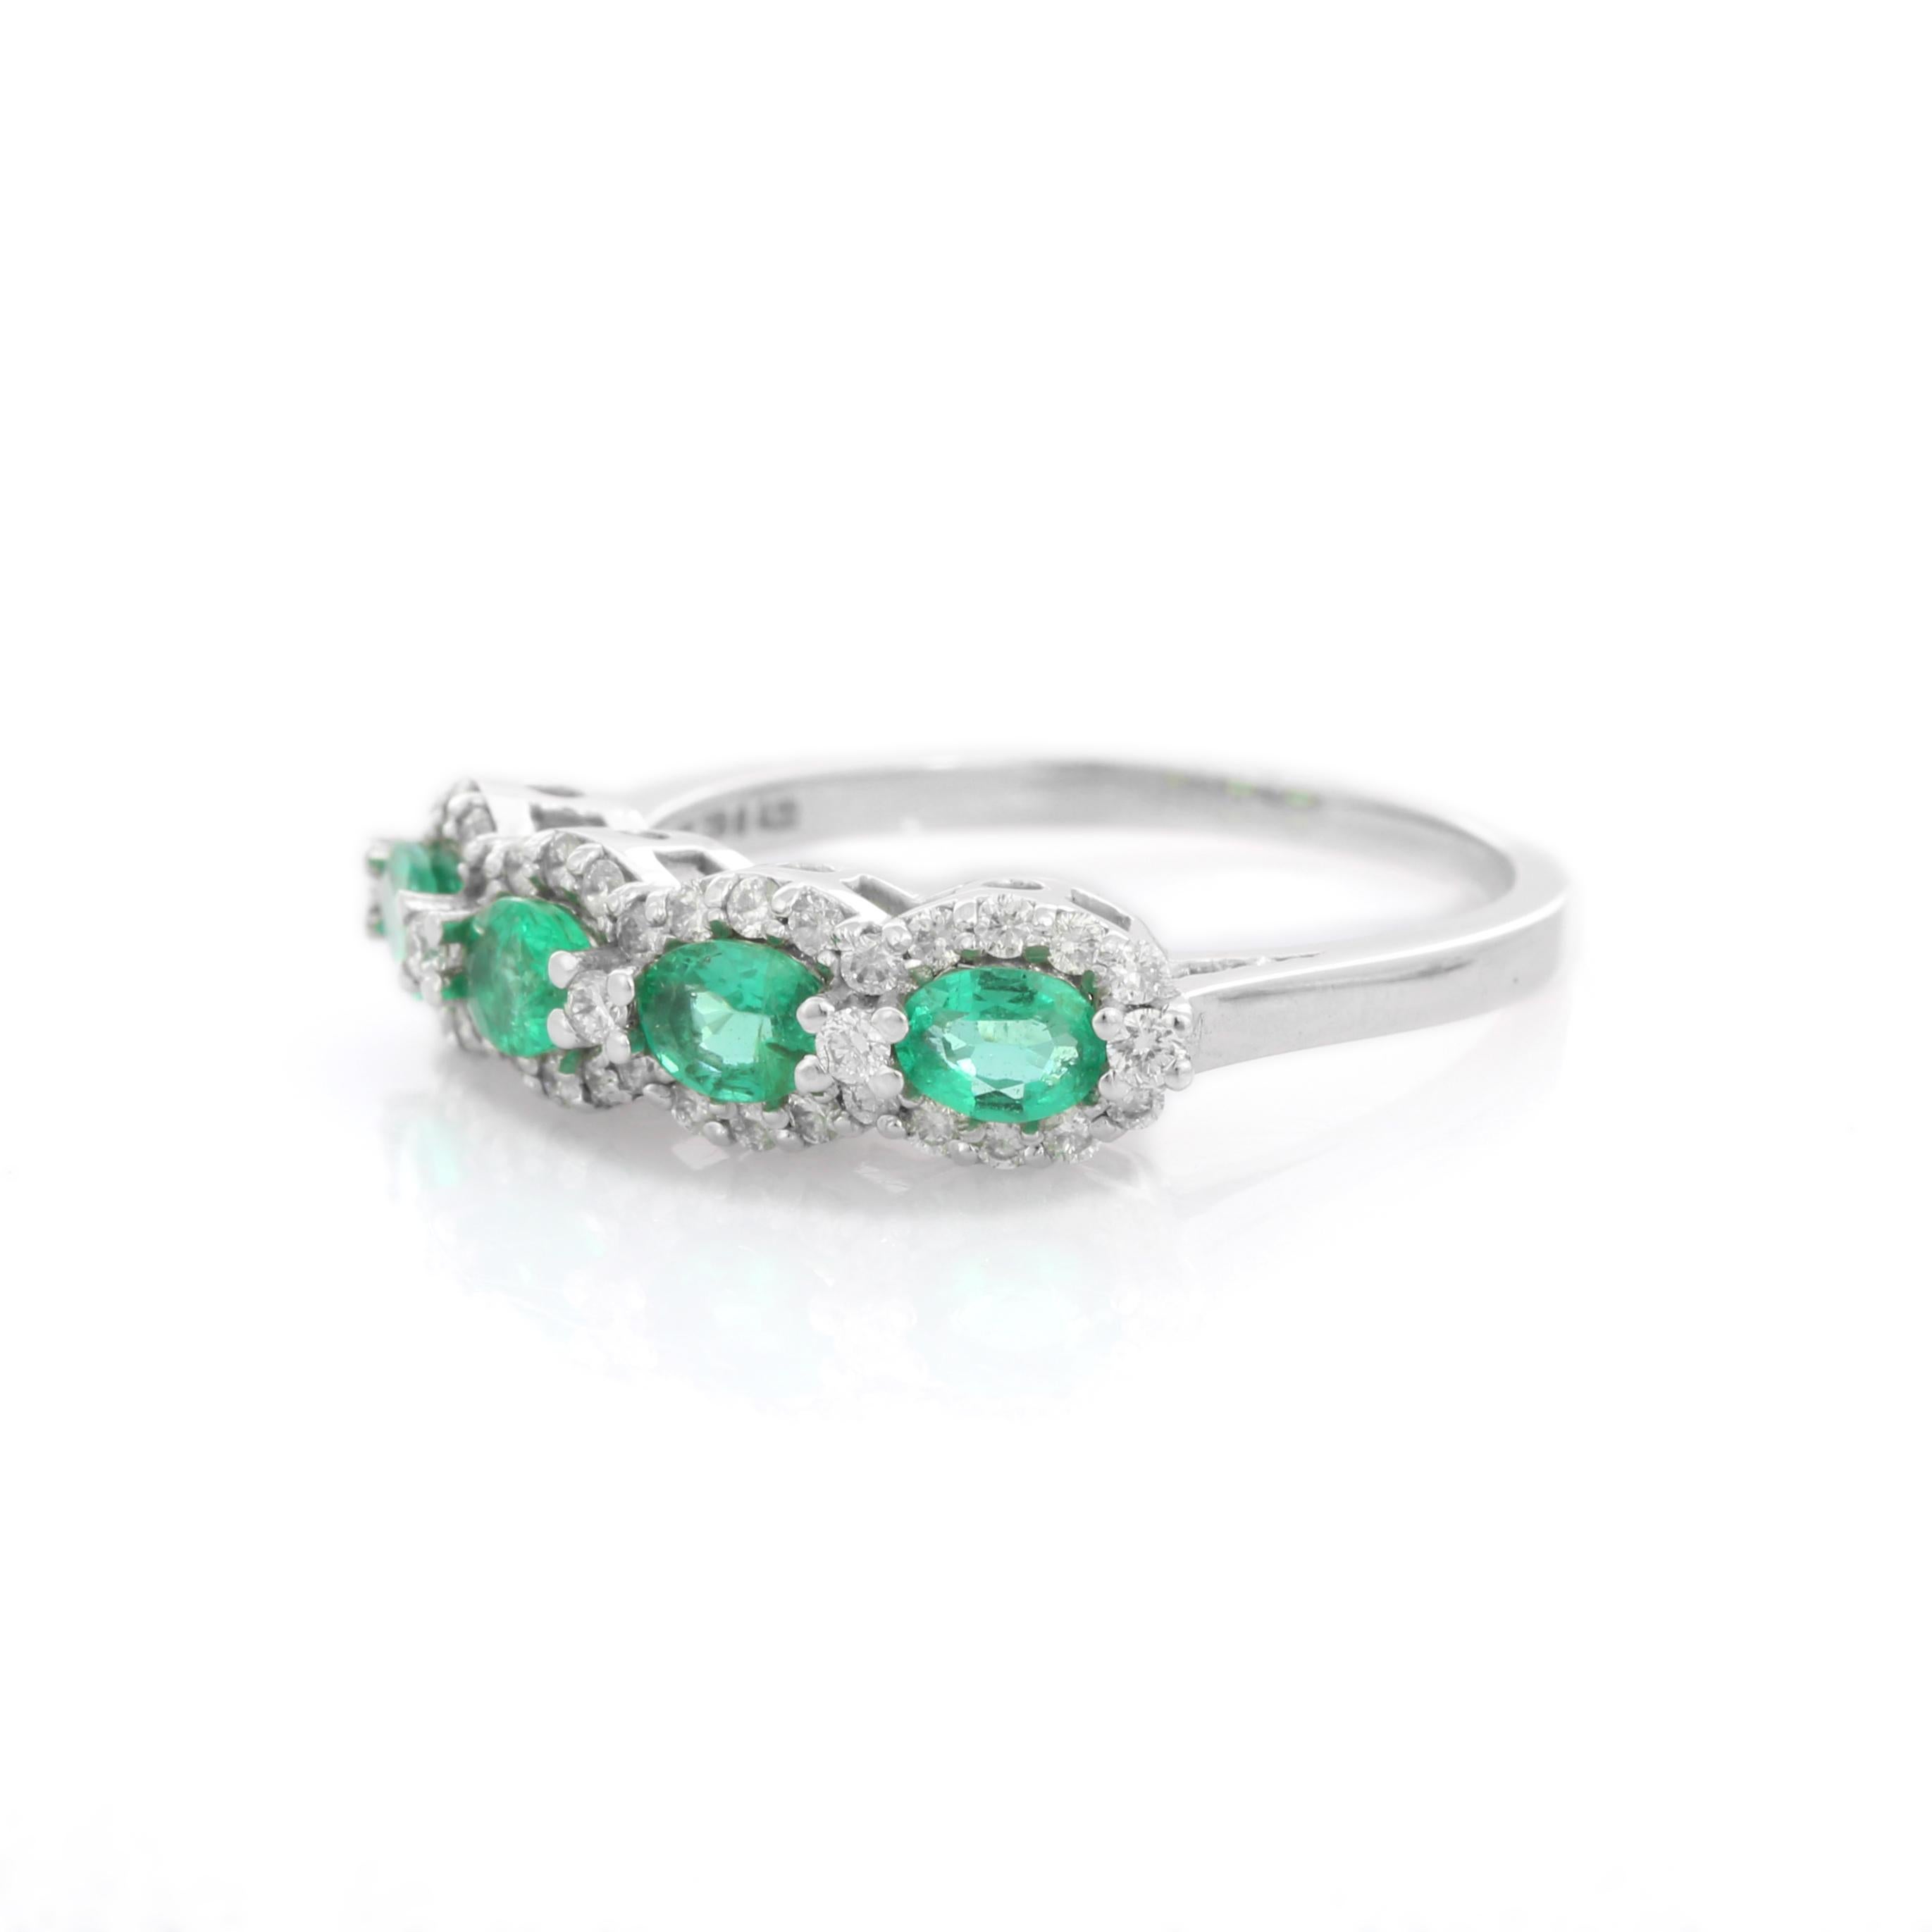 For Sale:  18K White Gold Emerald and Diamond Ring  4